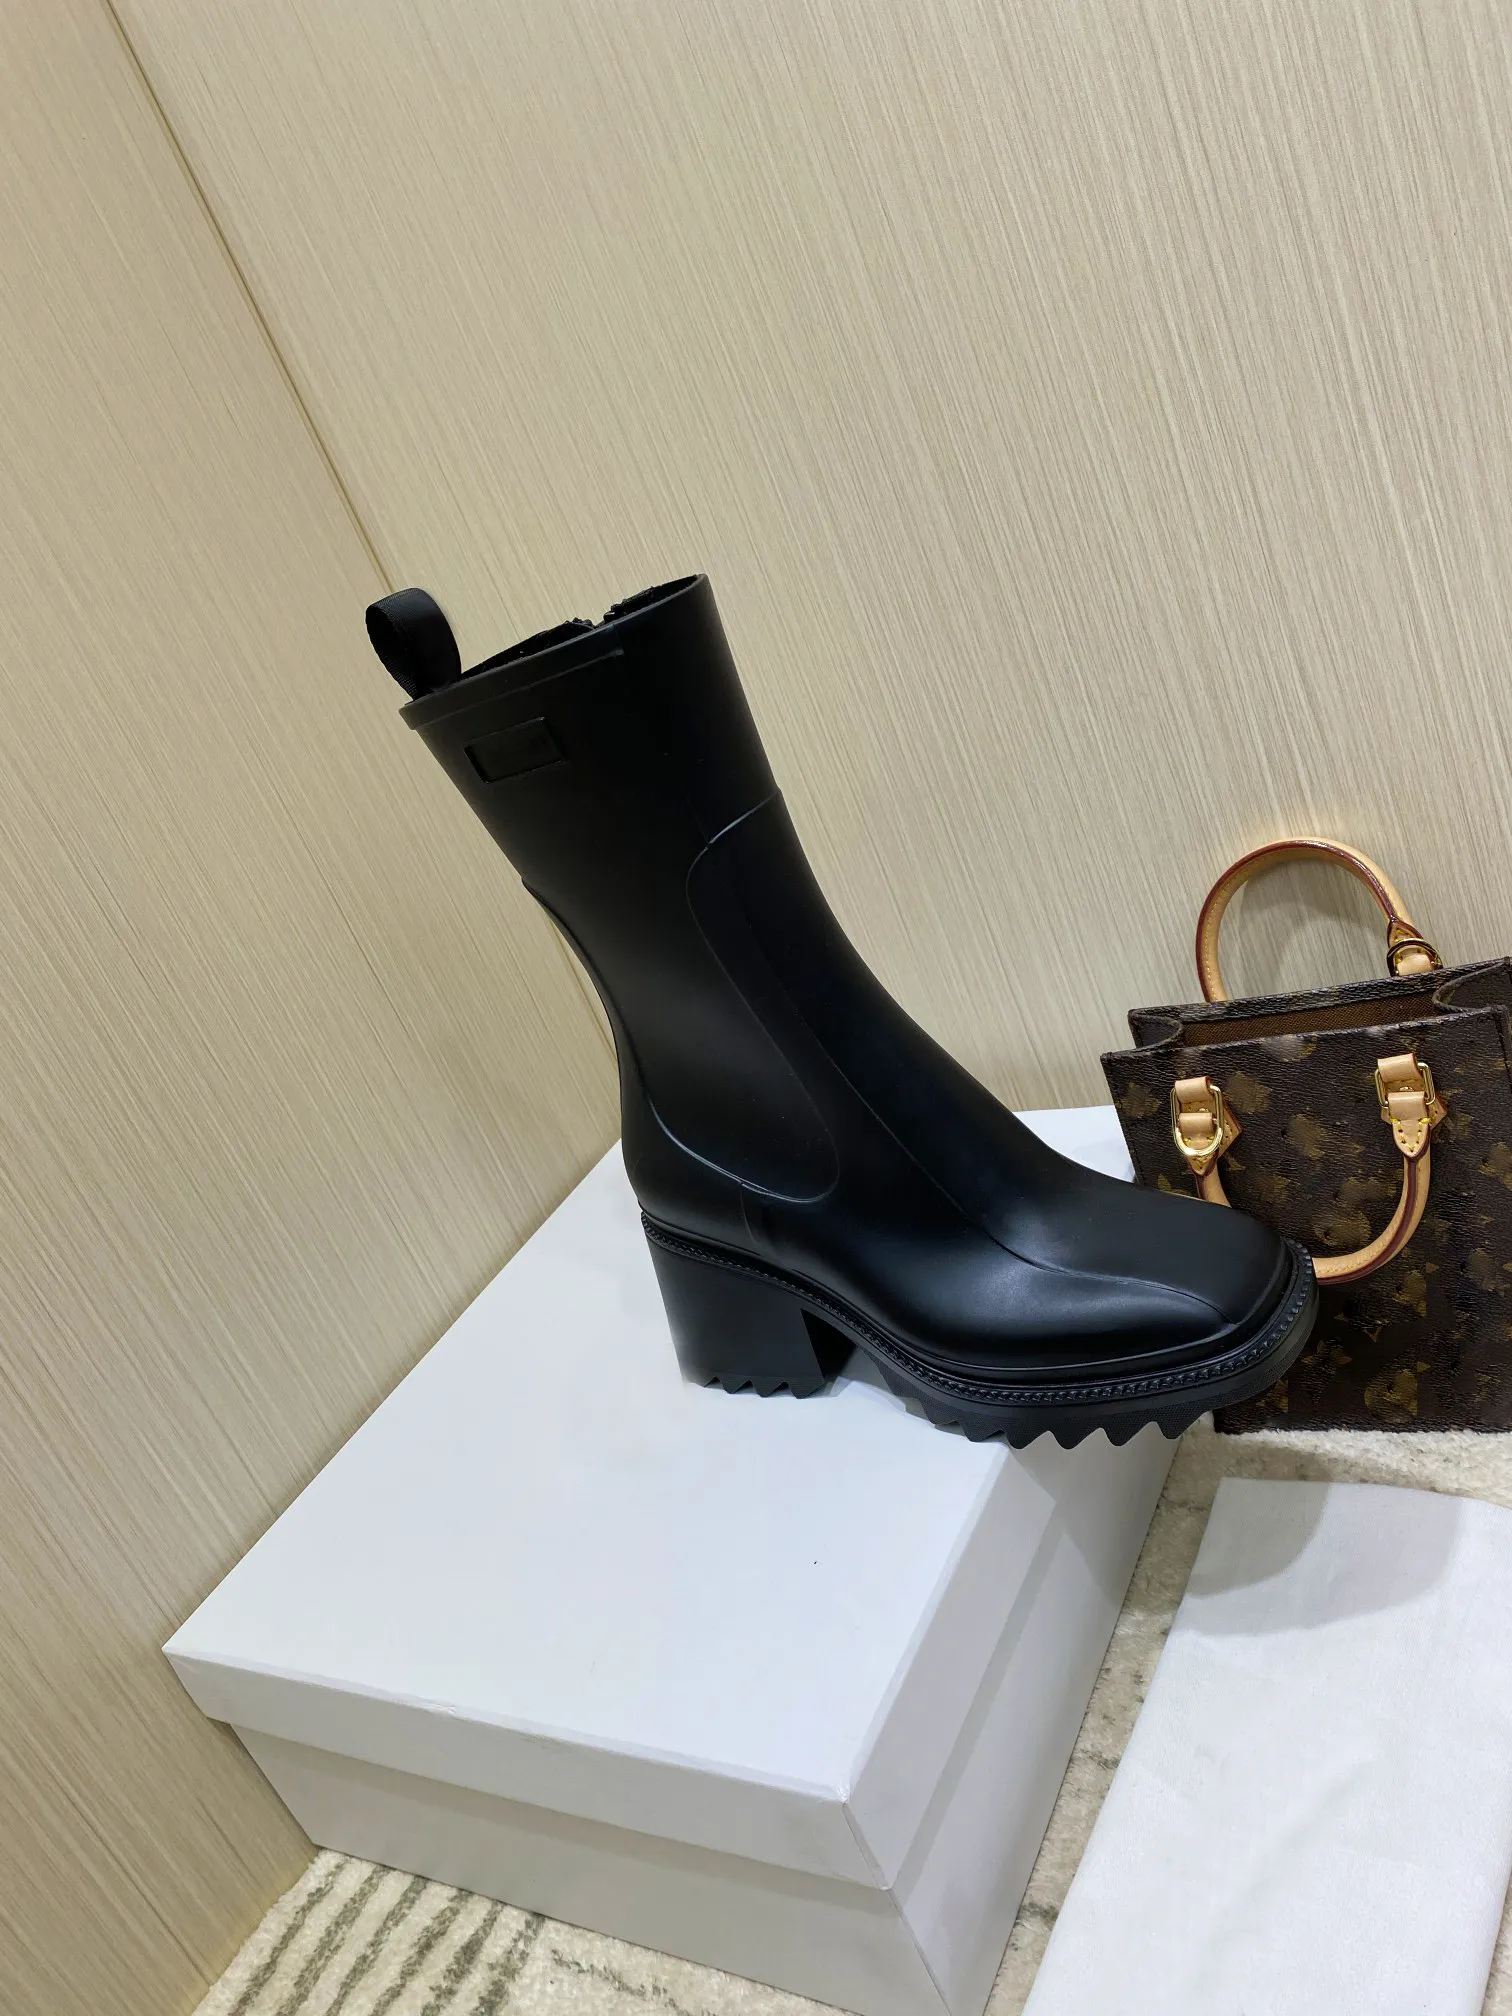 Designer Women`s Leather Boots Autumn and Winter Solid Color Brand Zipper Chunky Heels Fashion High Quality Boots with Box Size 35-40